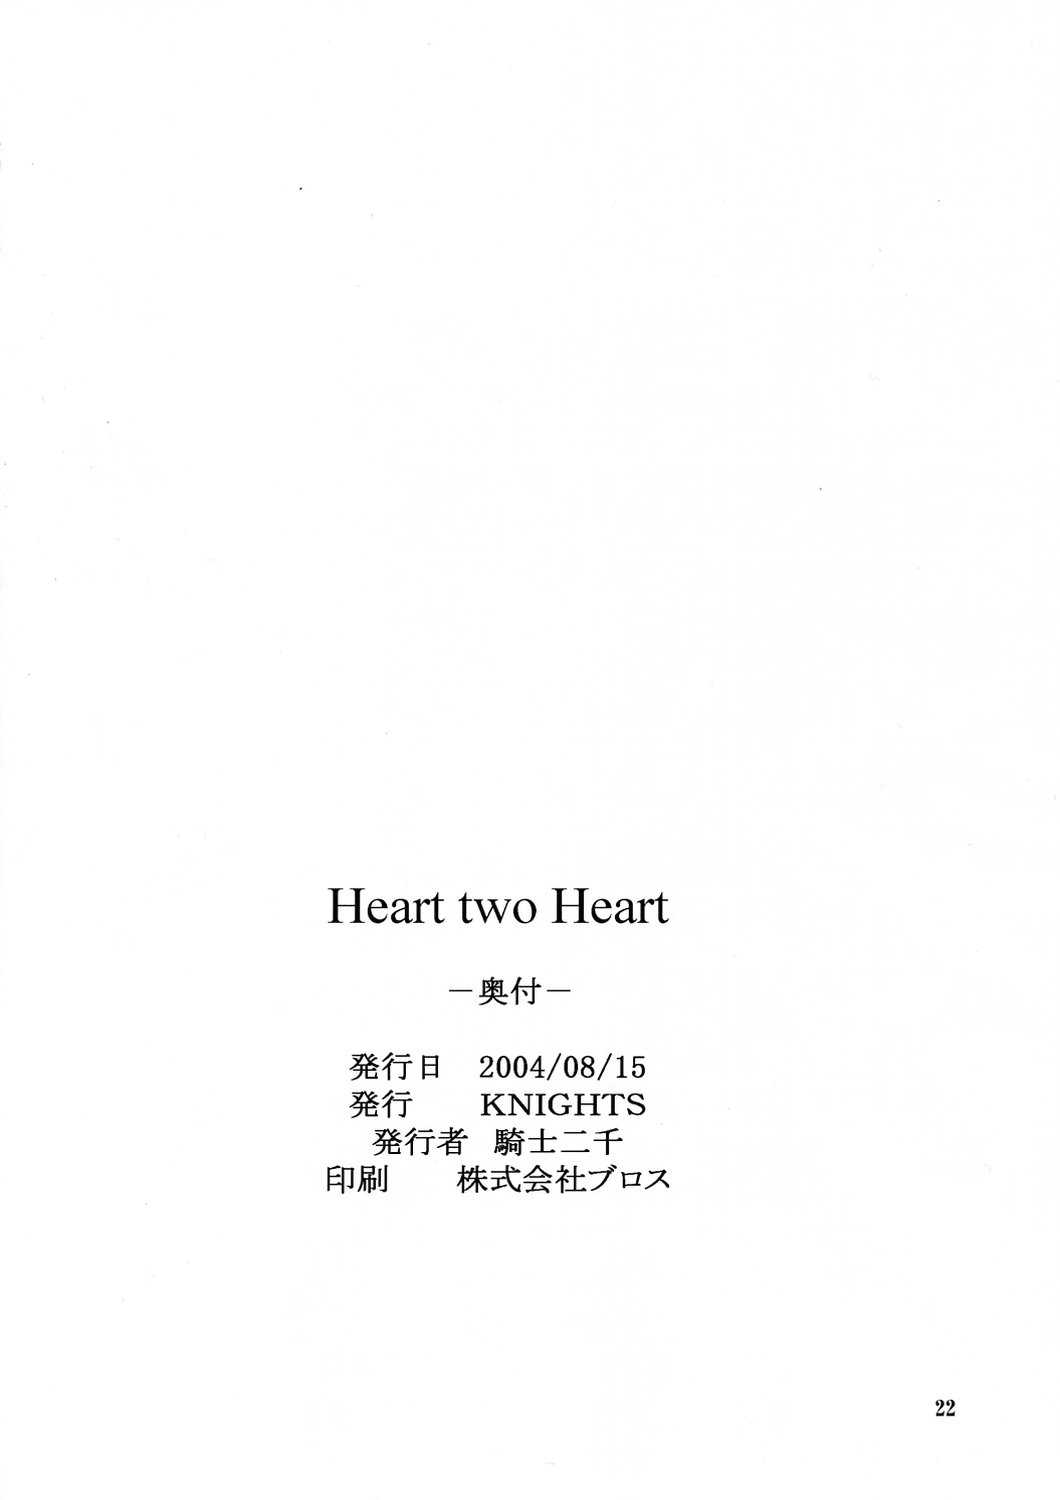 [KNIGHTS] H2H -Heart two Heart- (ToHeart) [KNIGHTS] H2H -Heart two Heart- (トゥハート)